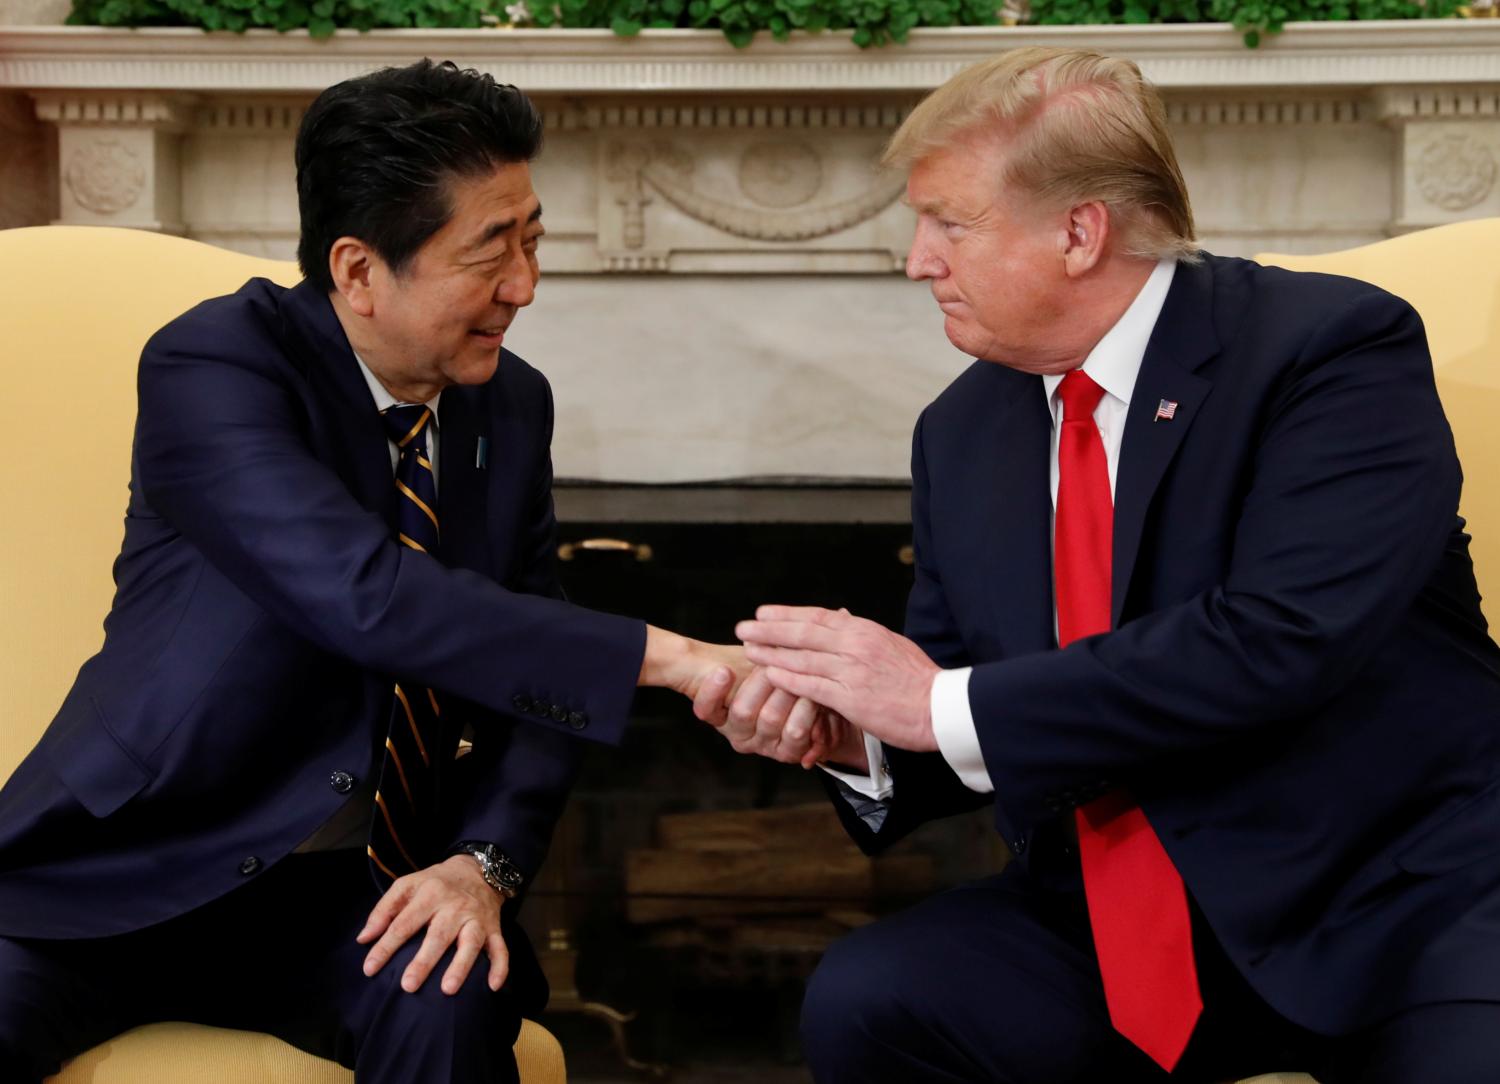 U.S. President Donald Trump meets with Japan's Prime Minister Shinzo Abe in the Oval Office at the White House in Washington, U.S., April 26, 2019. REUTERS/Kevin Lamarque - RC197ADEC1E0